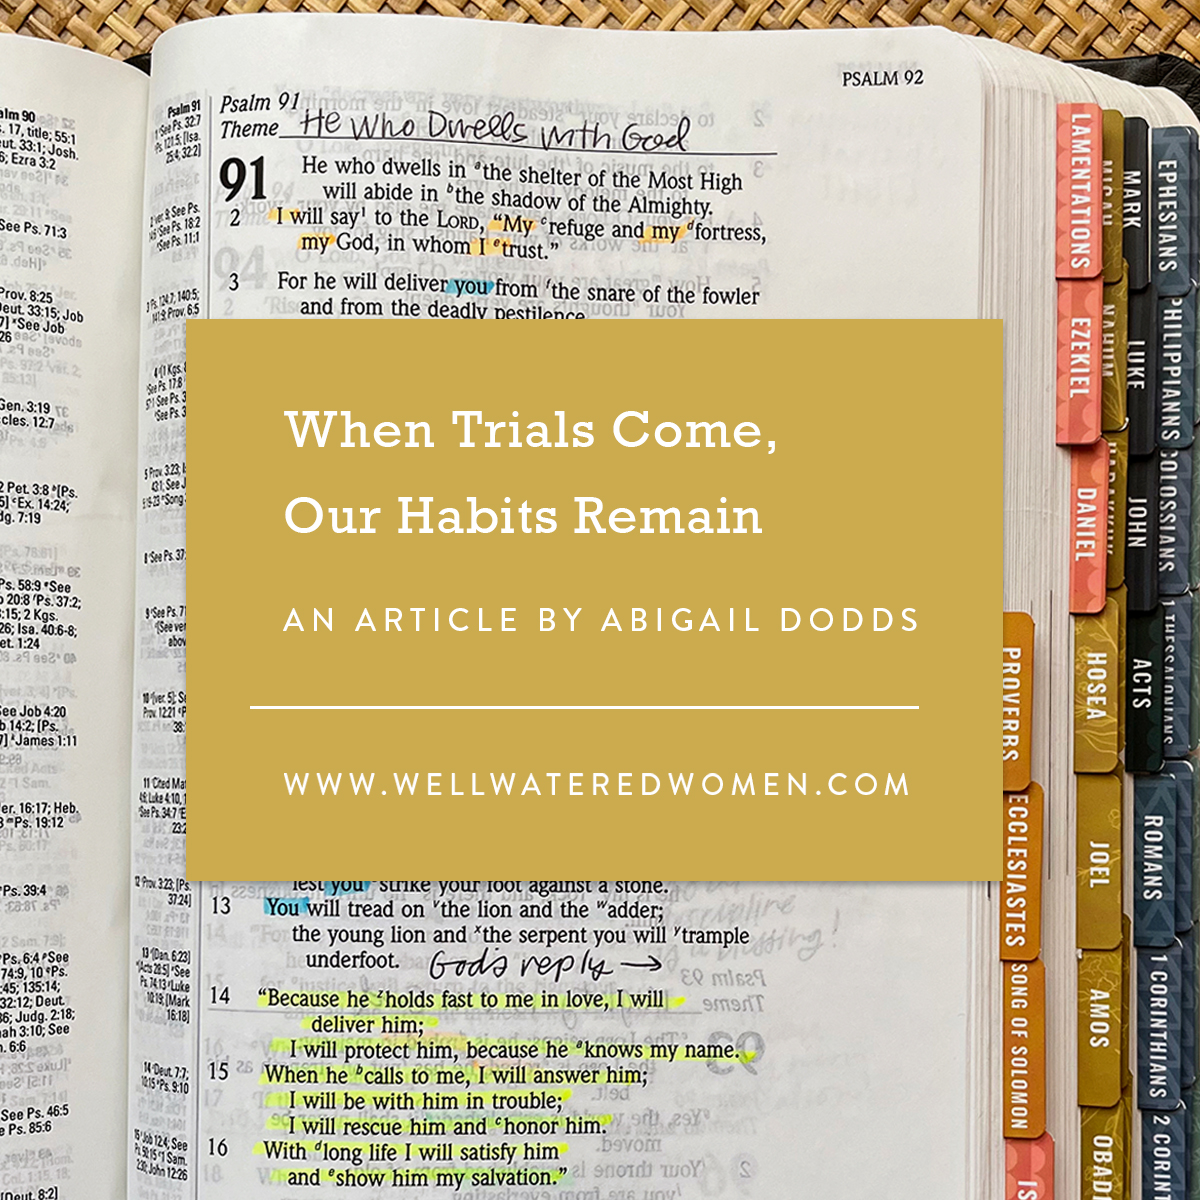 When Trials Come, Our Habits Remain - an Article from Well-Watered Women